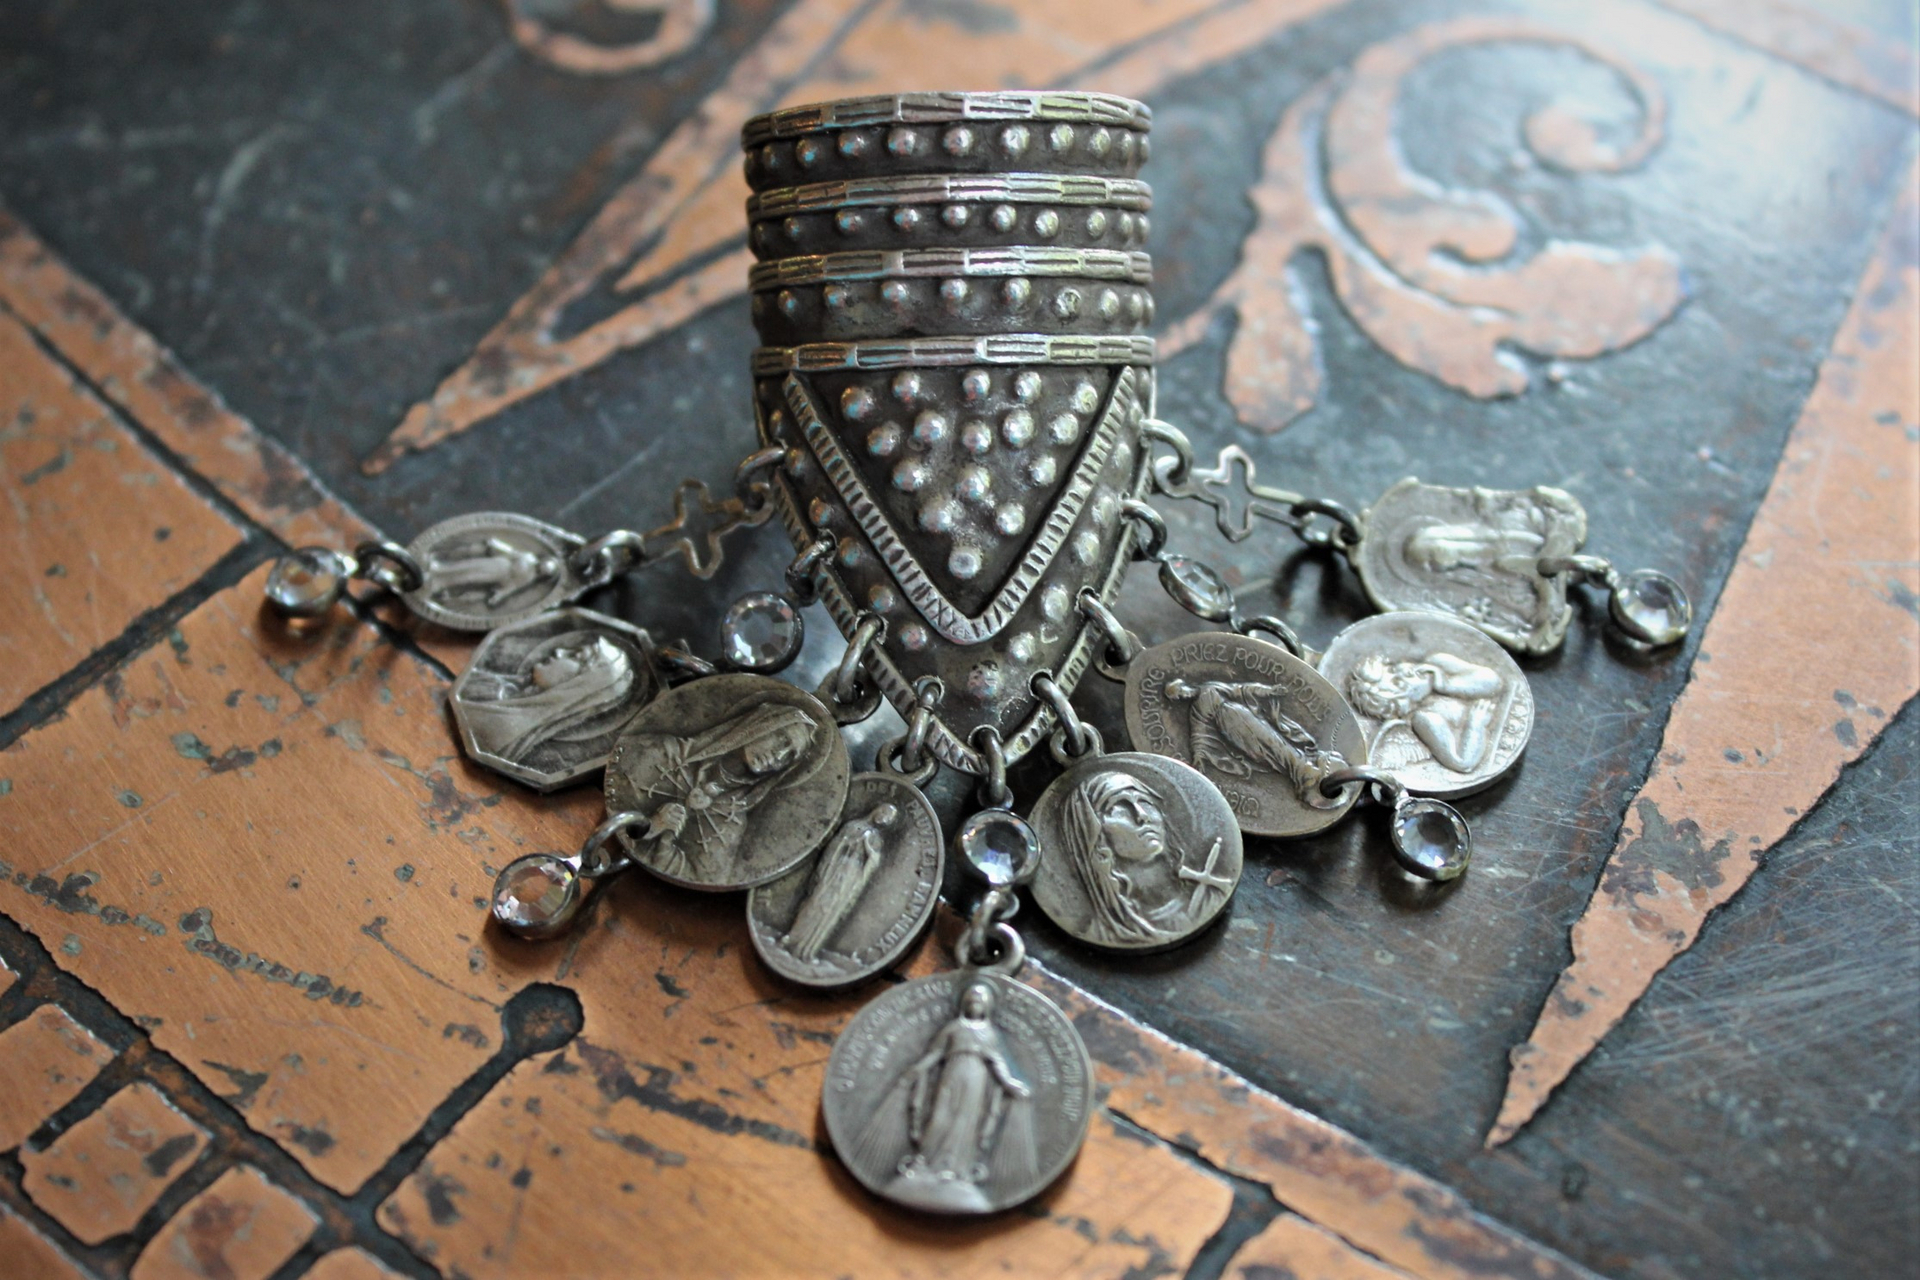 Unique Sterling Shield Dangle Ring with Miniature Antique French Medals,Tiny Bezel Set Faceted Crystal and Tiny Sterling Crosses